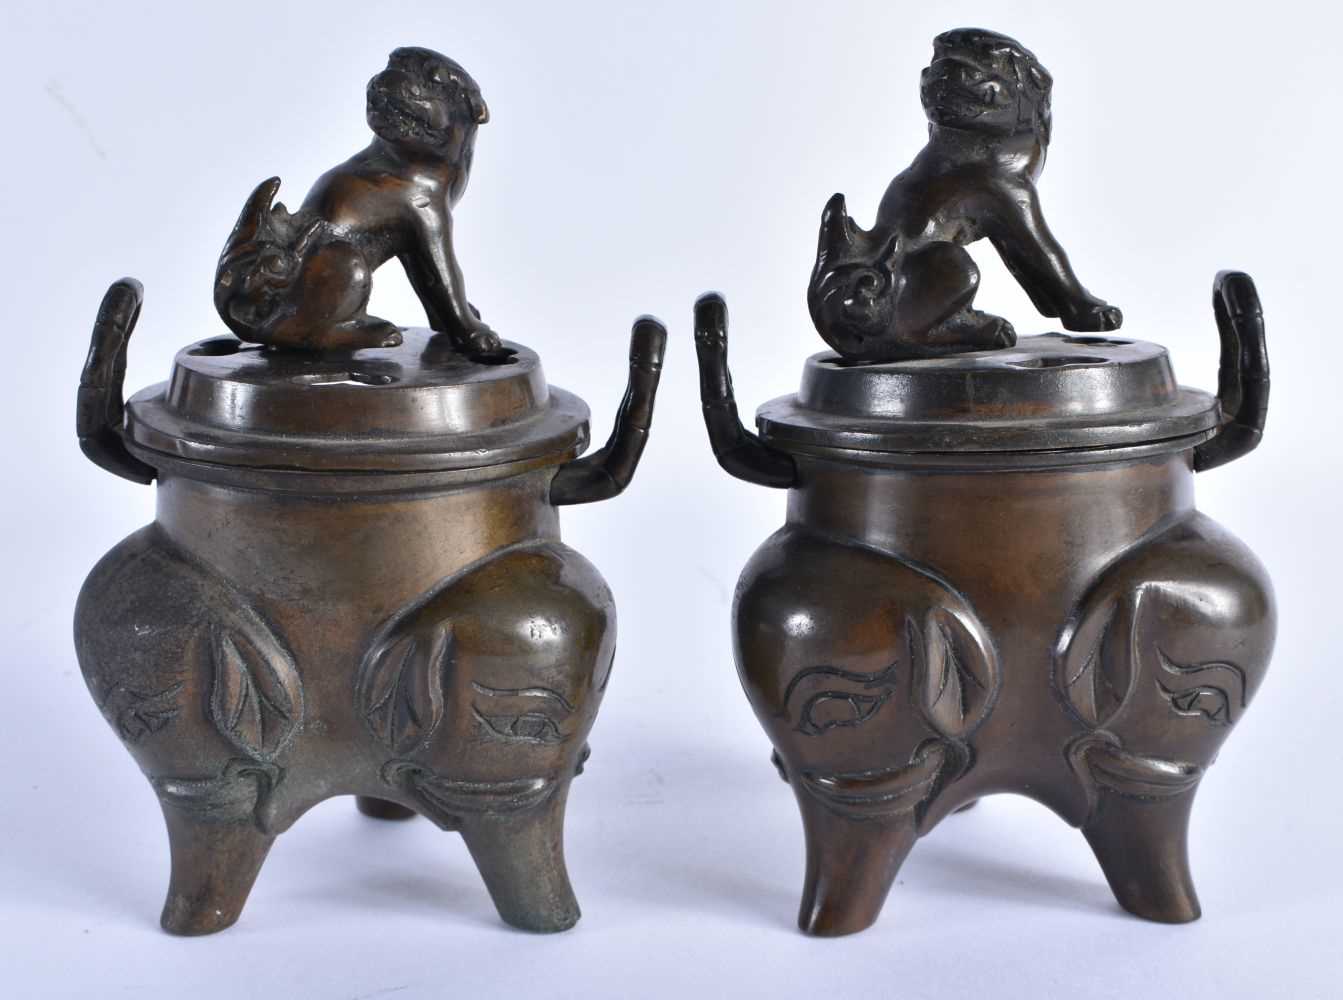 A PAIR OF LATE 19TH/20TH CENTURY JAPANESE MEIJI PERIOD BRONZE CENSERS AND COVERS formed with